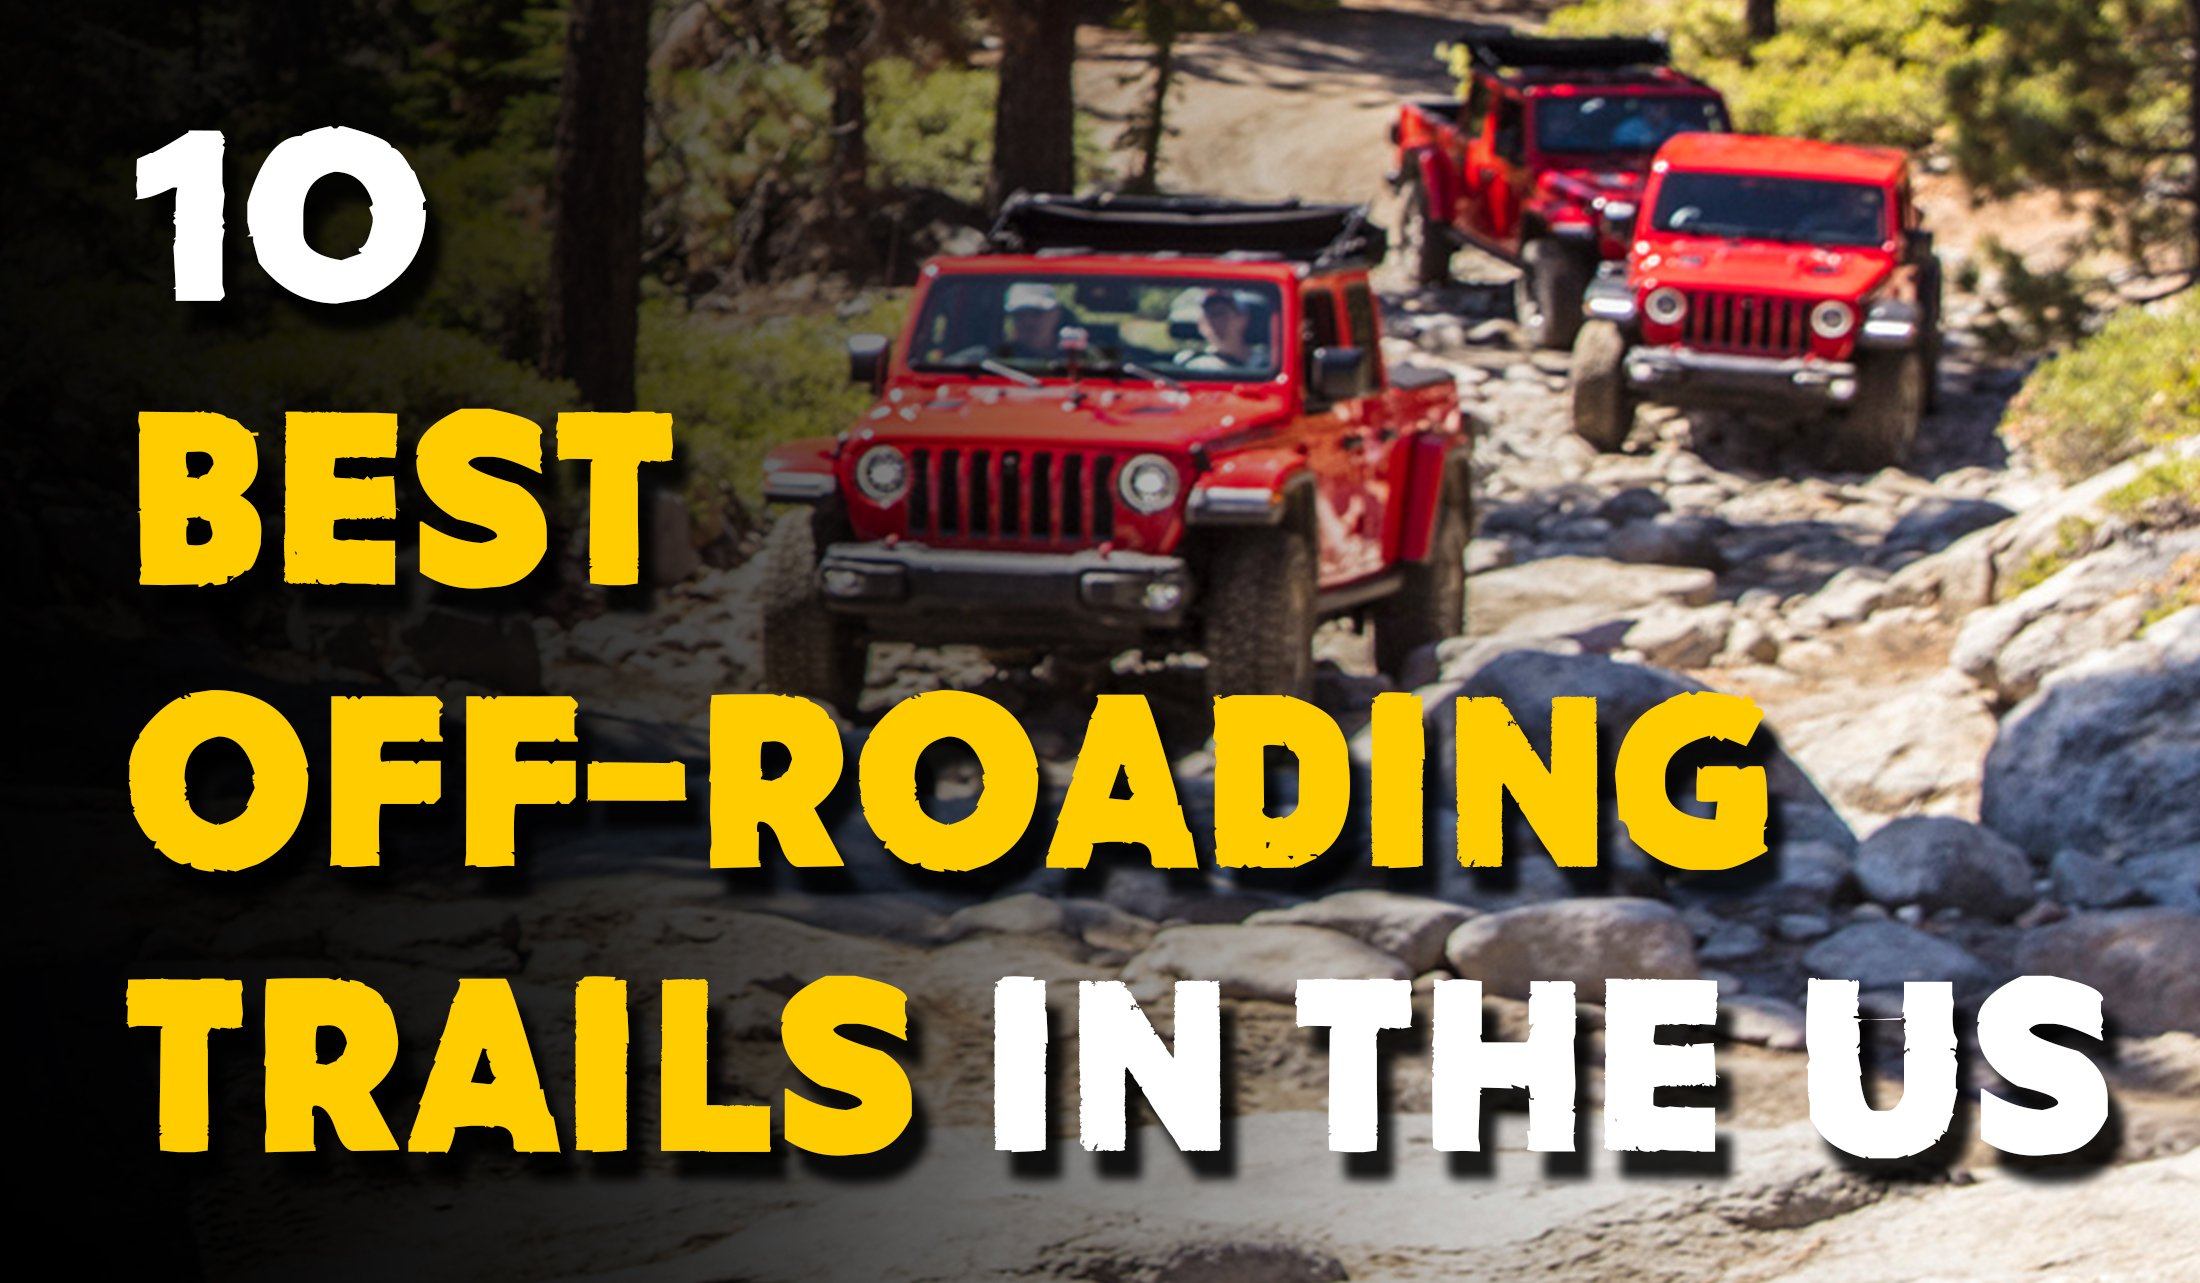 5 places that will make you want to try off-roading - Men's Journal